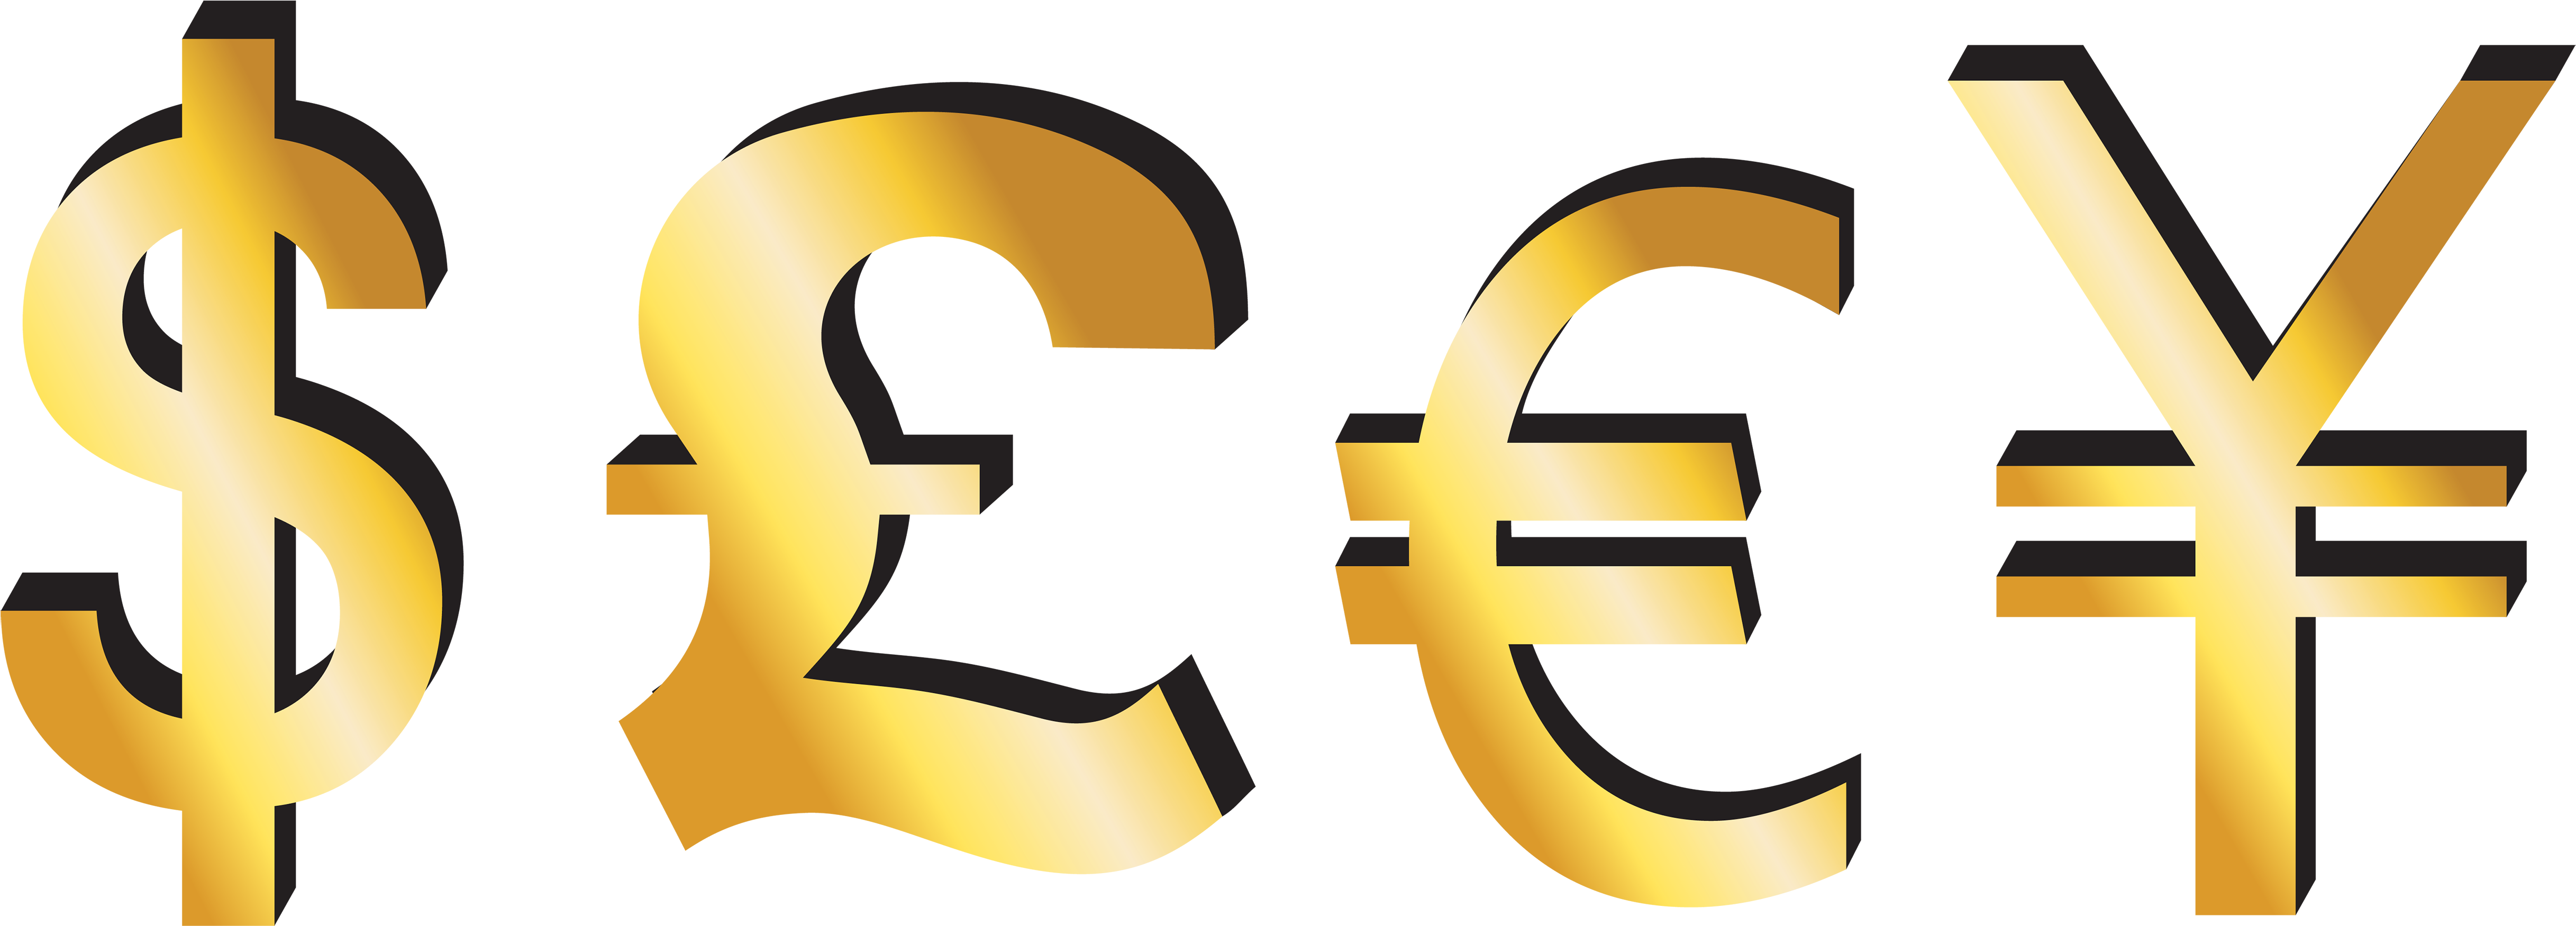 Dollar Pound Euro Yen Signs Png Clipart - Dollar Euro Sign Png (5000x1798)